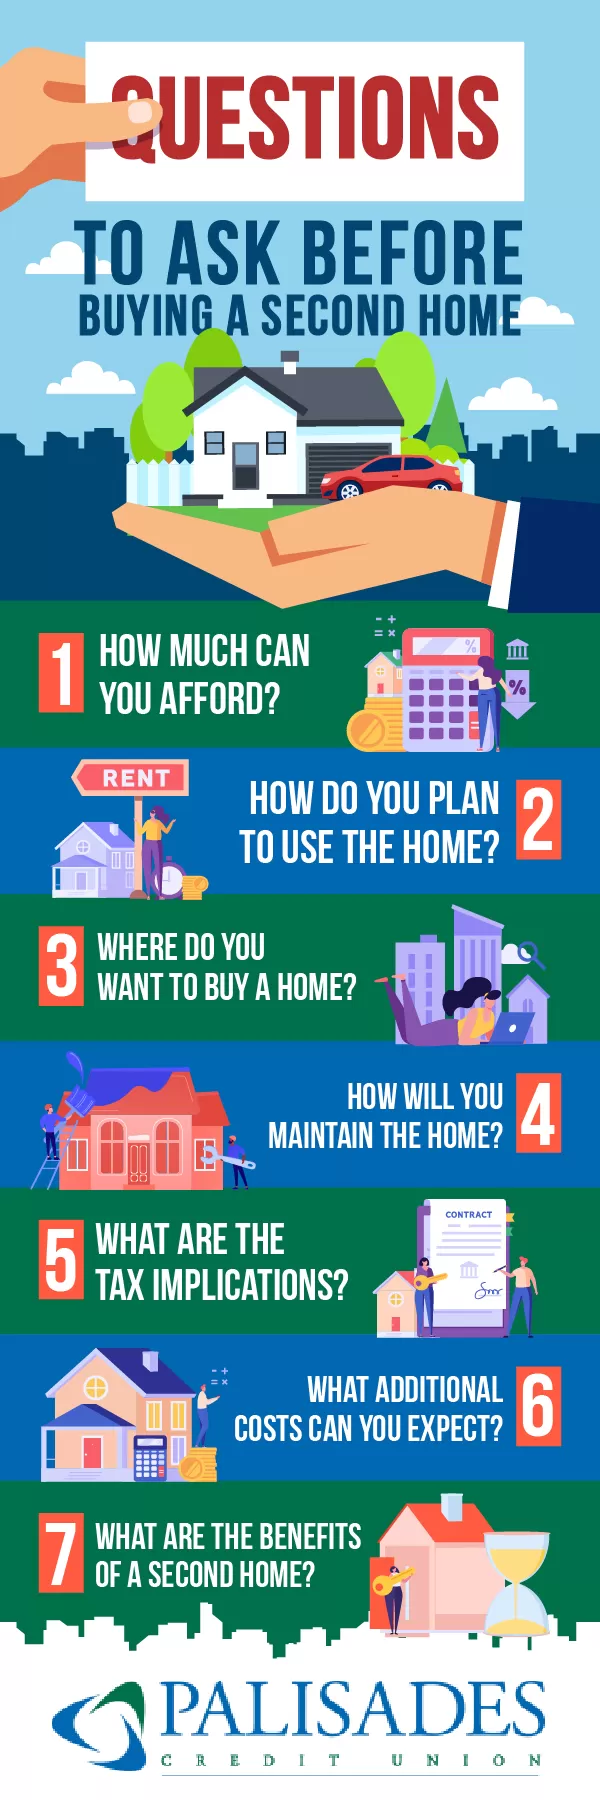 Questions To Ask Before Buying A Second Home  How much can you afford? How do you plan to use the home? Where do you want to buy a home? How will you maintain the home? What are the tax implications? What additional costs can you expect? What are the benefits of a second home?